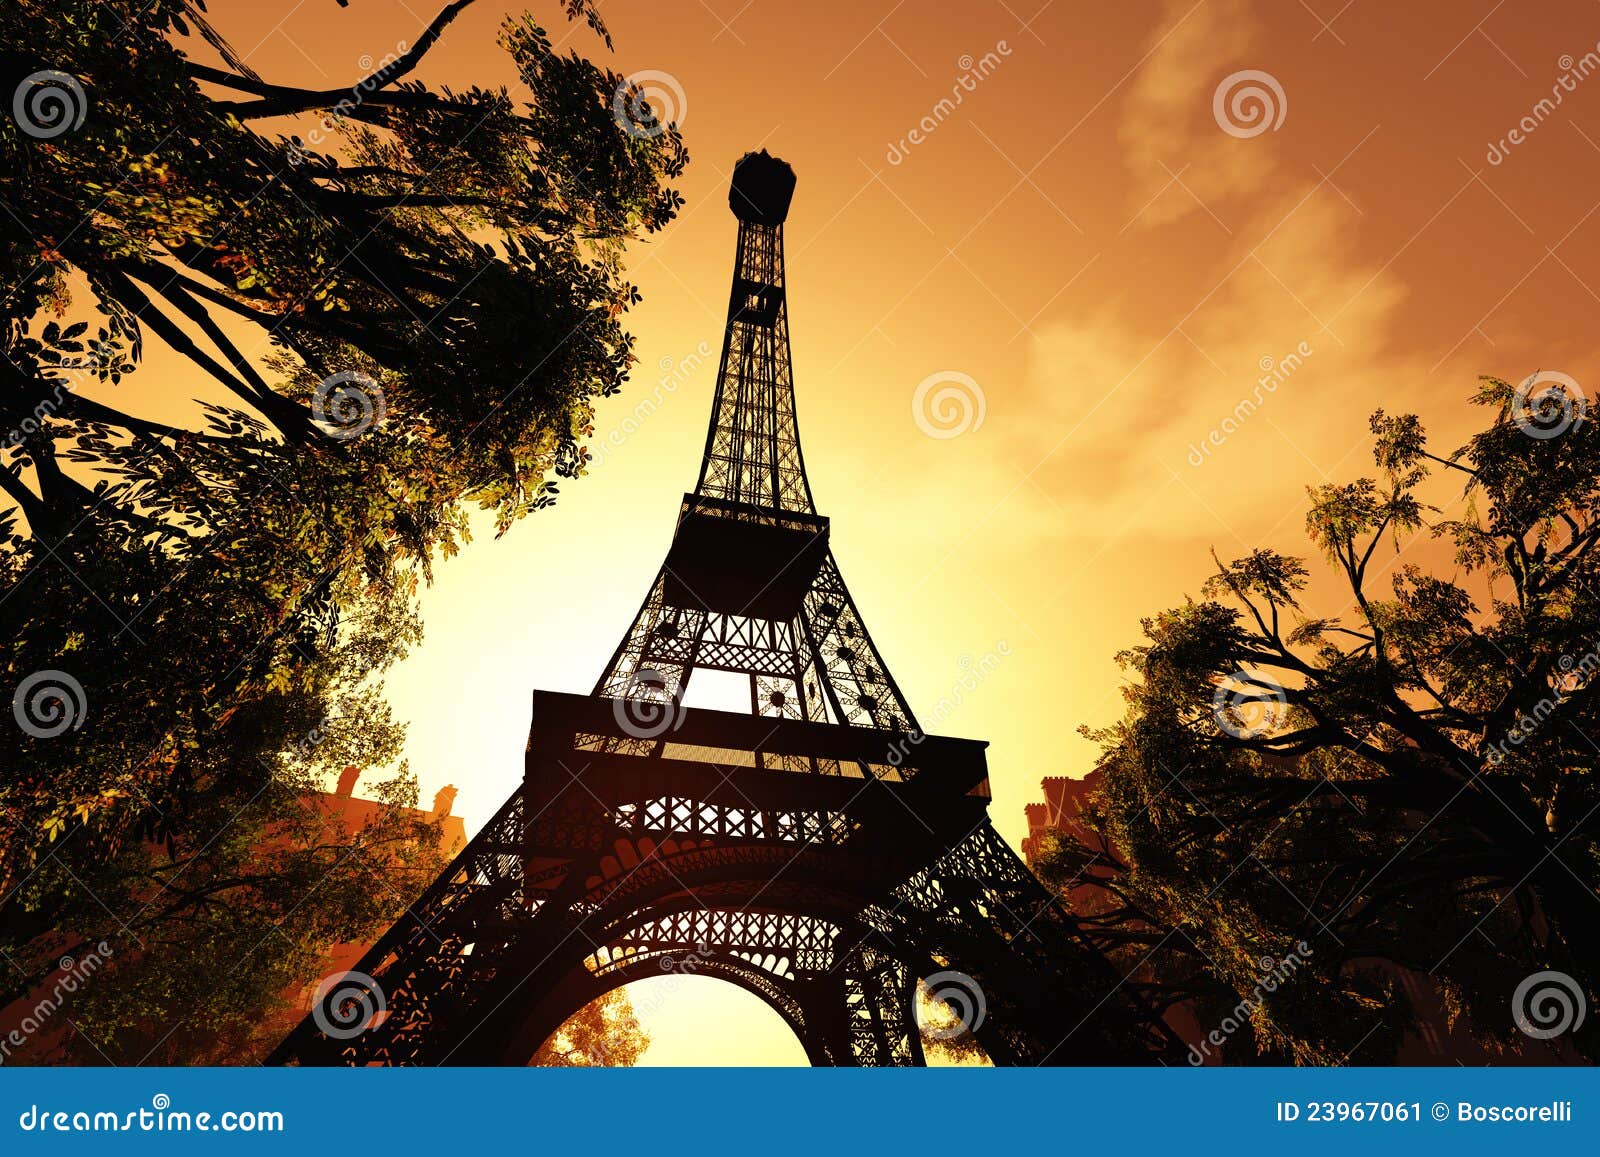 1,947 Eiffel Tower China Images, Stock Photos, 3D objects, & Vectors